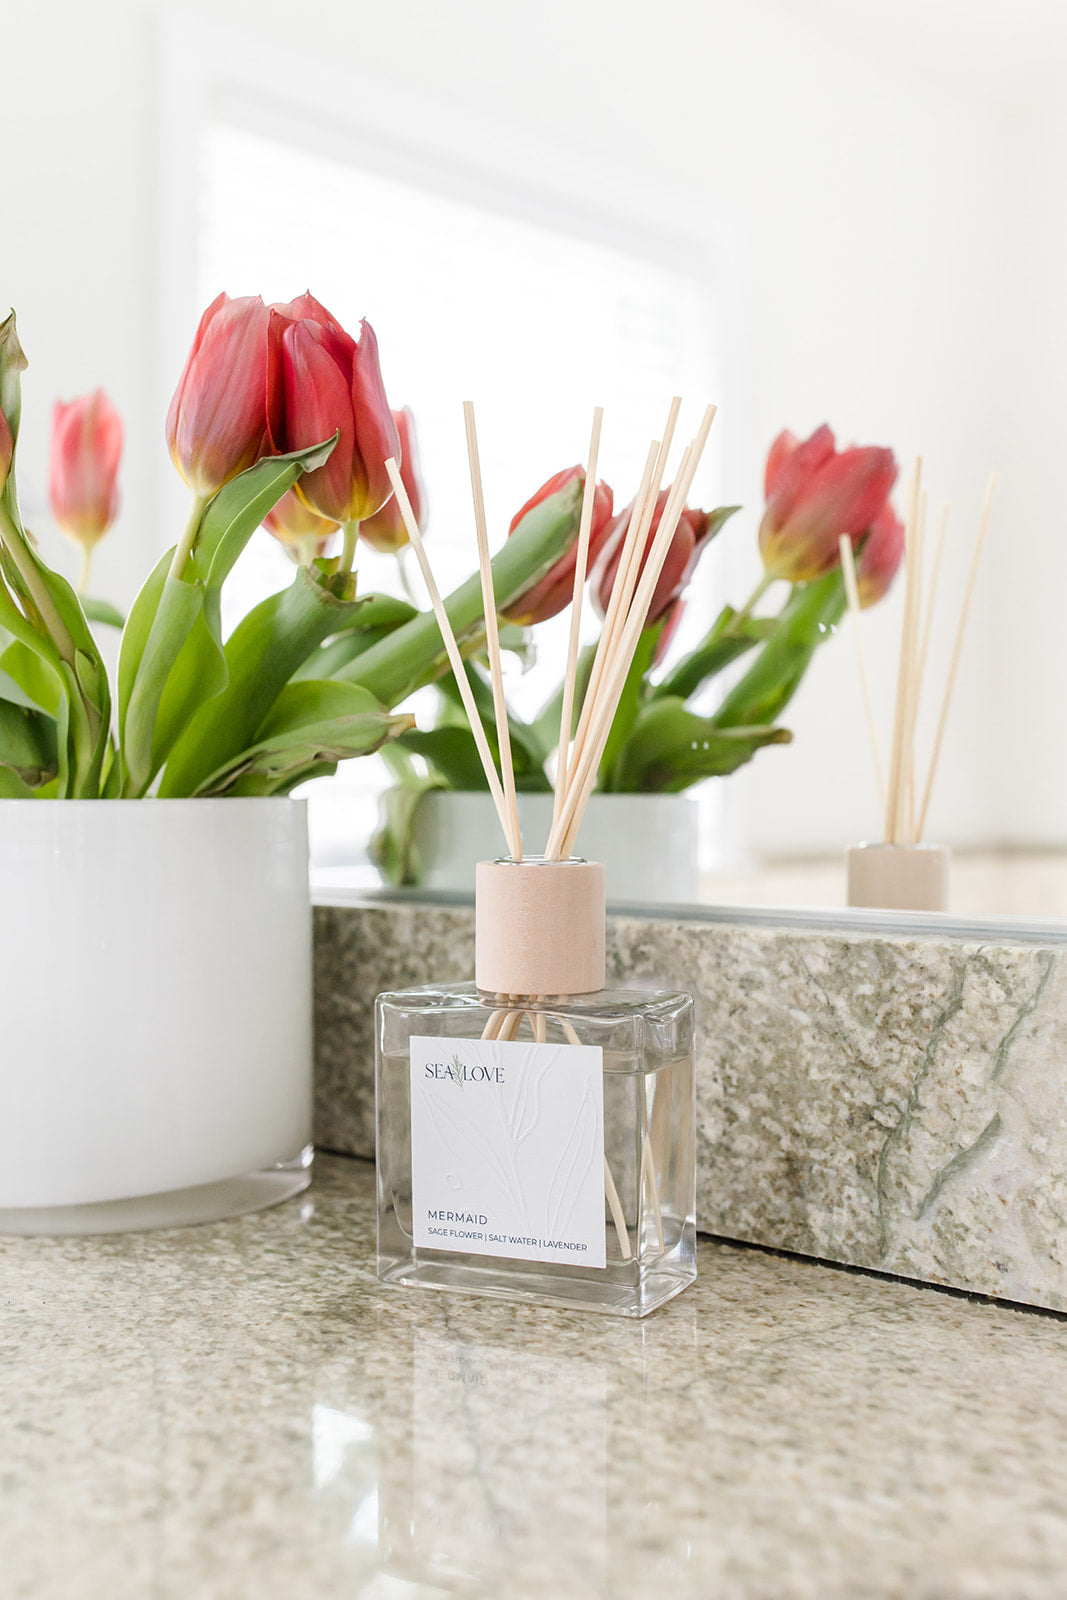 Elegant home fragrance diffuser with reed sticks placed on a marble countertop beside a bouquet of tulips, creating a fresh and inviting atmosphere.